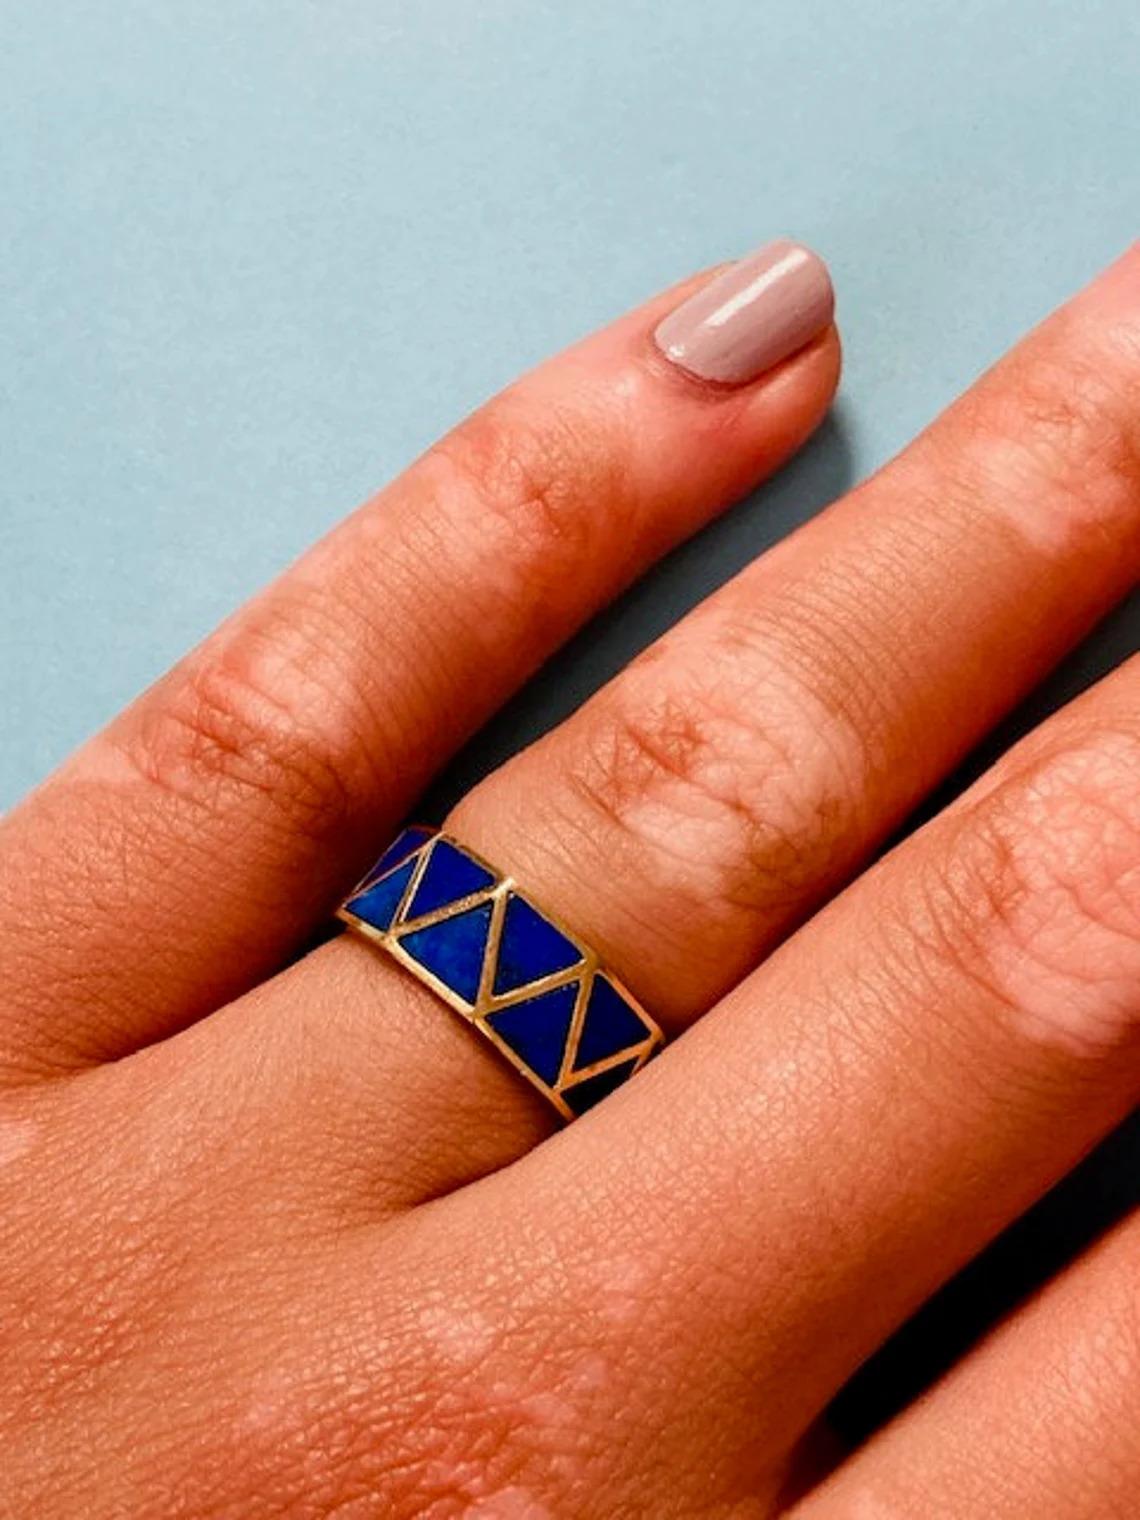 Vintage 18k Gold Lapis Lazuli Zig-Zag Ring Limited Edition, Size N UK/AU

This cool, vintage ring made of striking lapis lazuli and 18k yellow gold is the perfect accompaniment to any look. It's geometric, mosaic-style pattern adds a pop of colour